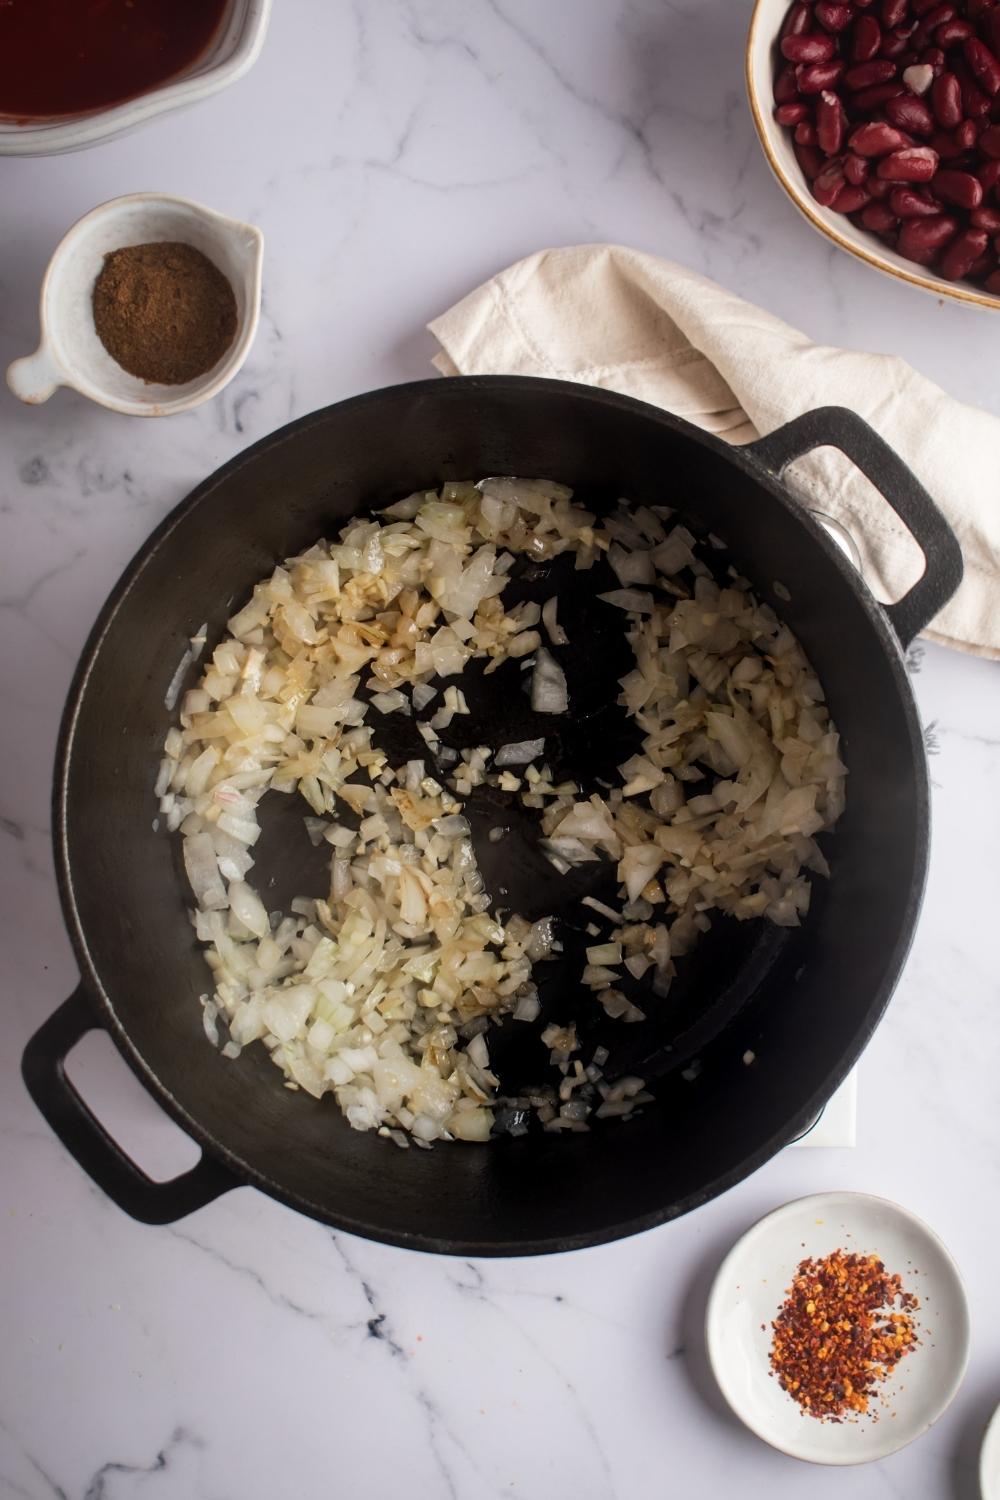 An overhead view of a skillet cooking garlic and onion.